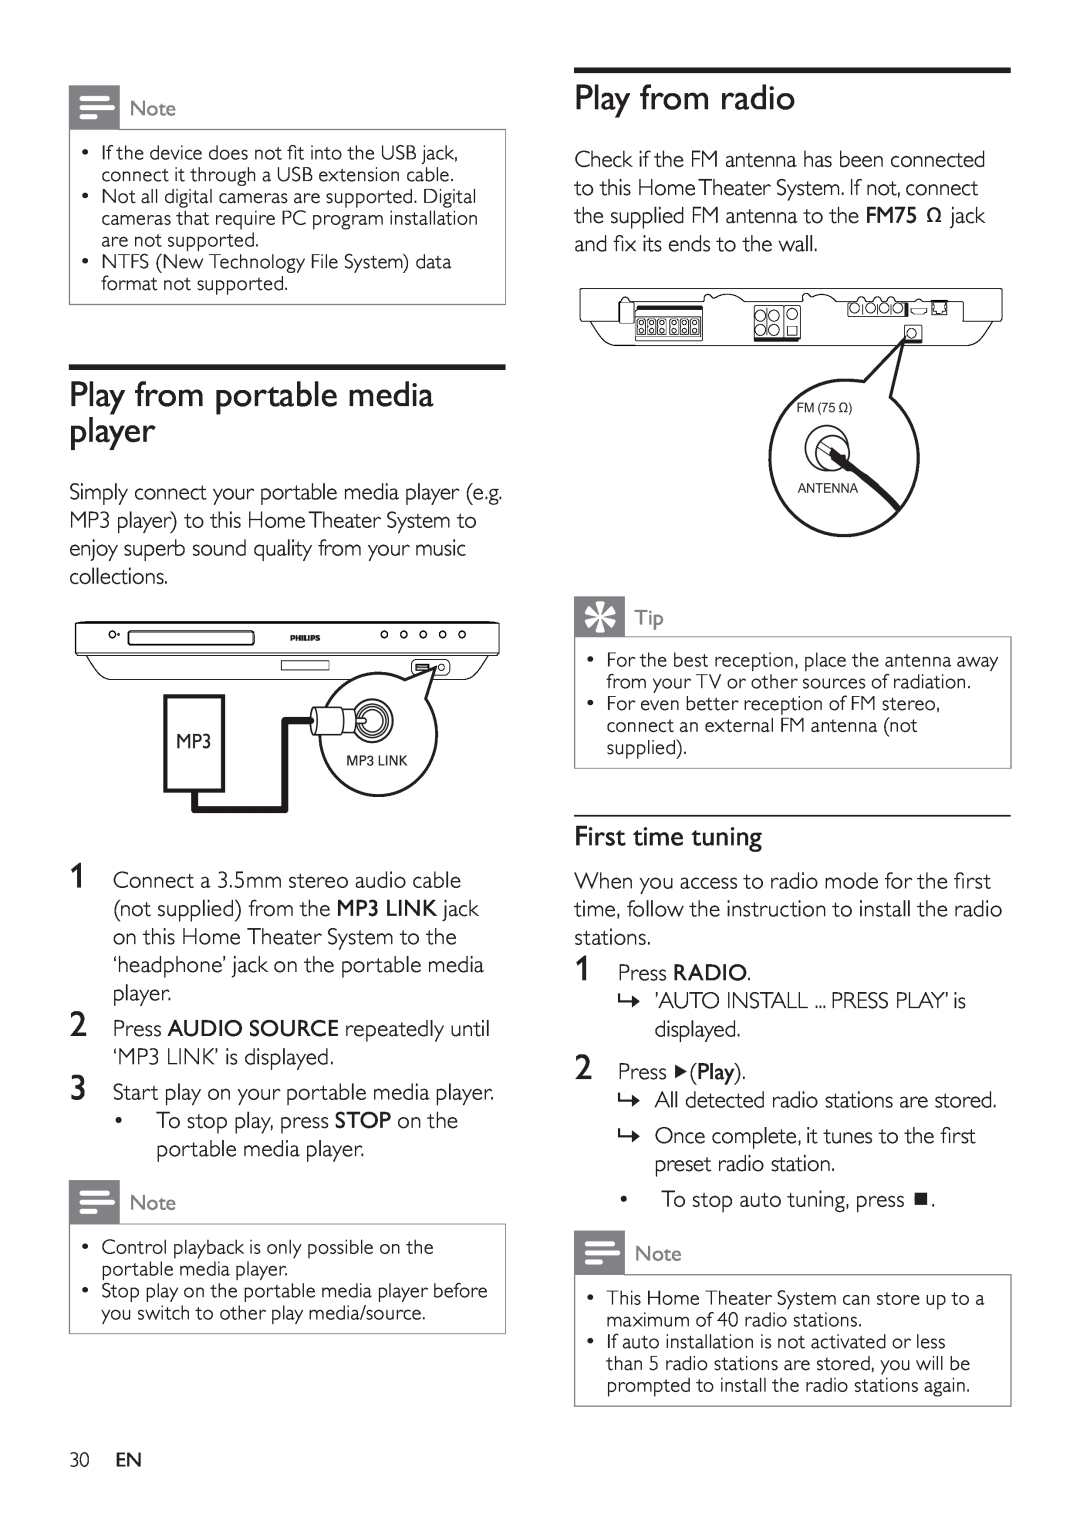 Philips HTS7500, HTS7520 user manual Play from portable media player, Play from radio, First time tuning 